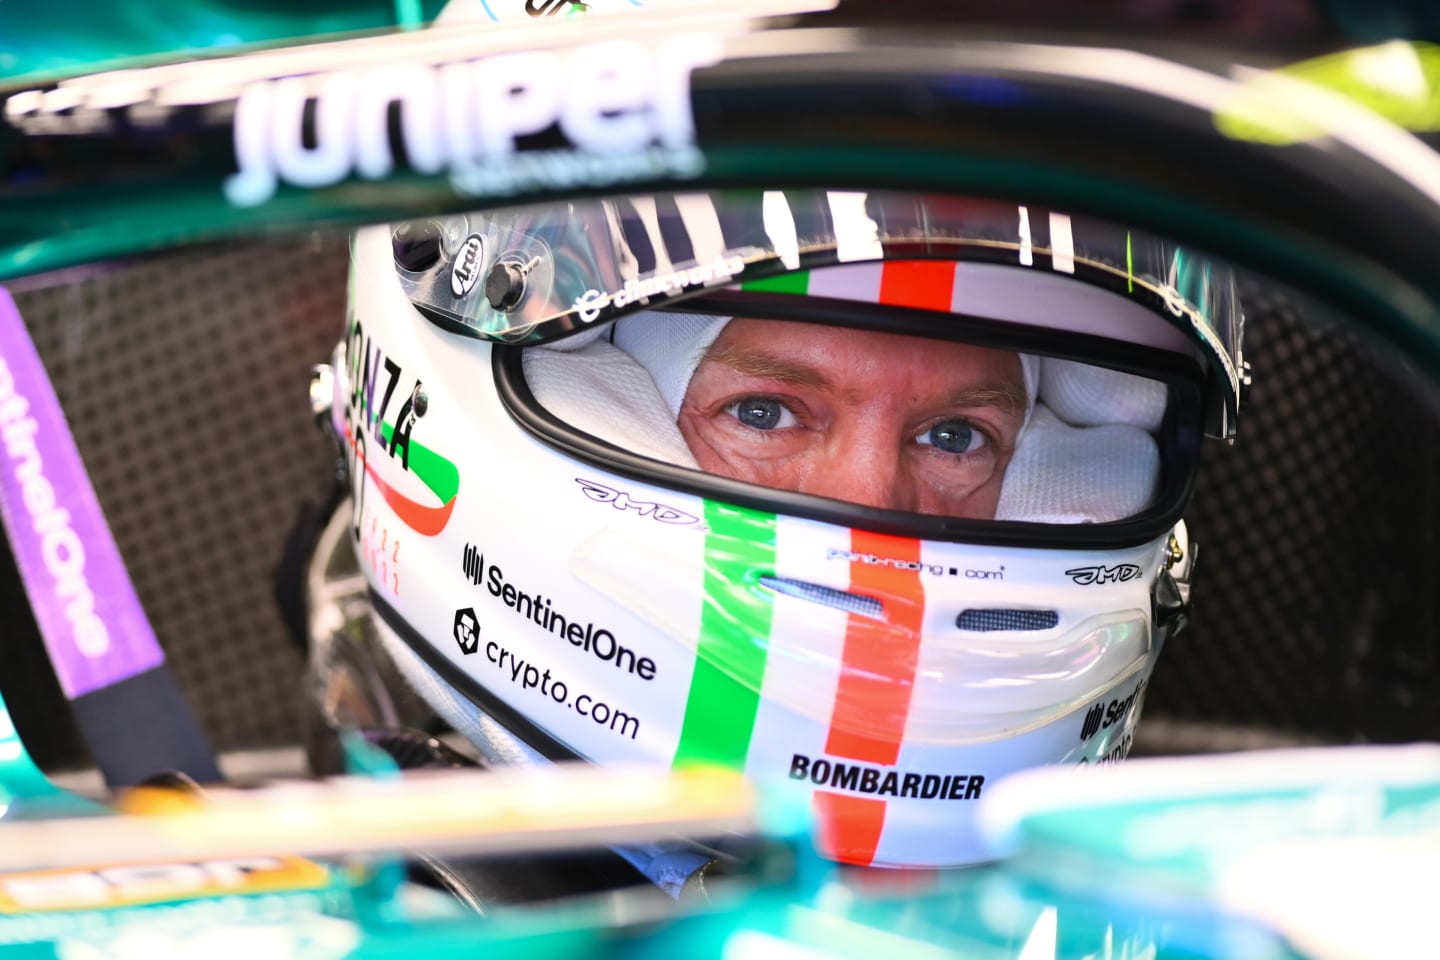 MONZA, ITALY - SEPTEMBER 10: Sebastian Vettel of Germany and Aston Martin F1 Team prepares to drive in the garage during final practice ahead of the F1 Grand Prix of Italy at Autodromo Nazionale Monza on September 10, 2022 in Monza, Italy. (Photo by Dan Mullan/Getty Images)